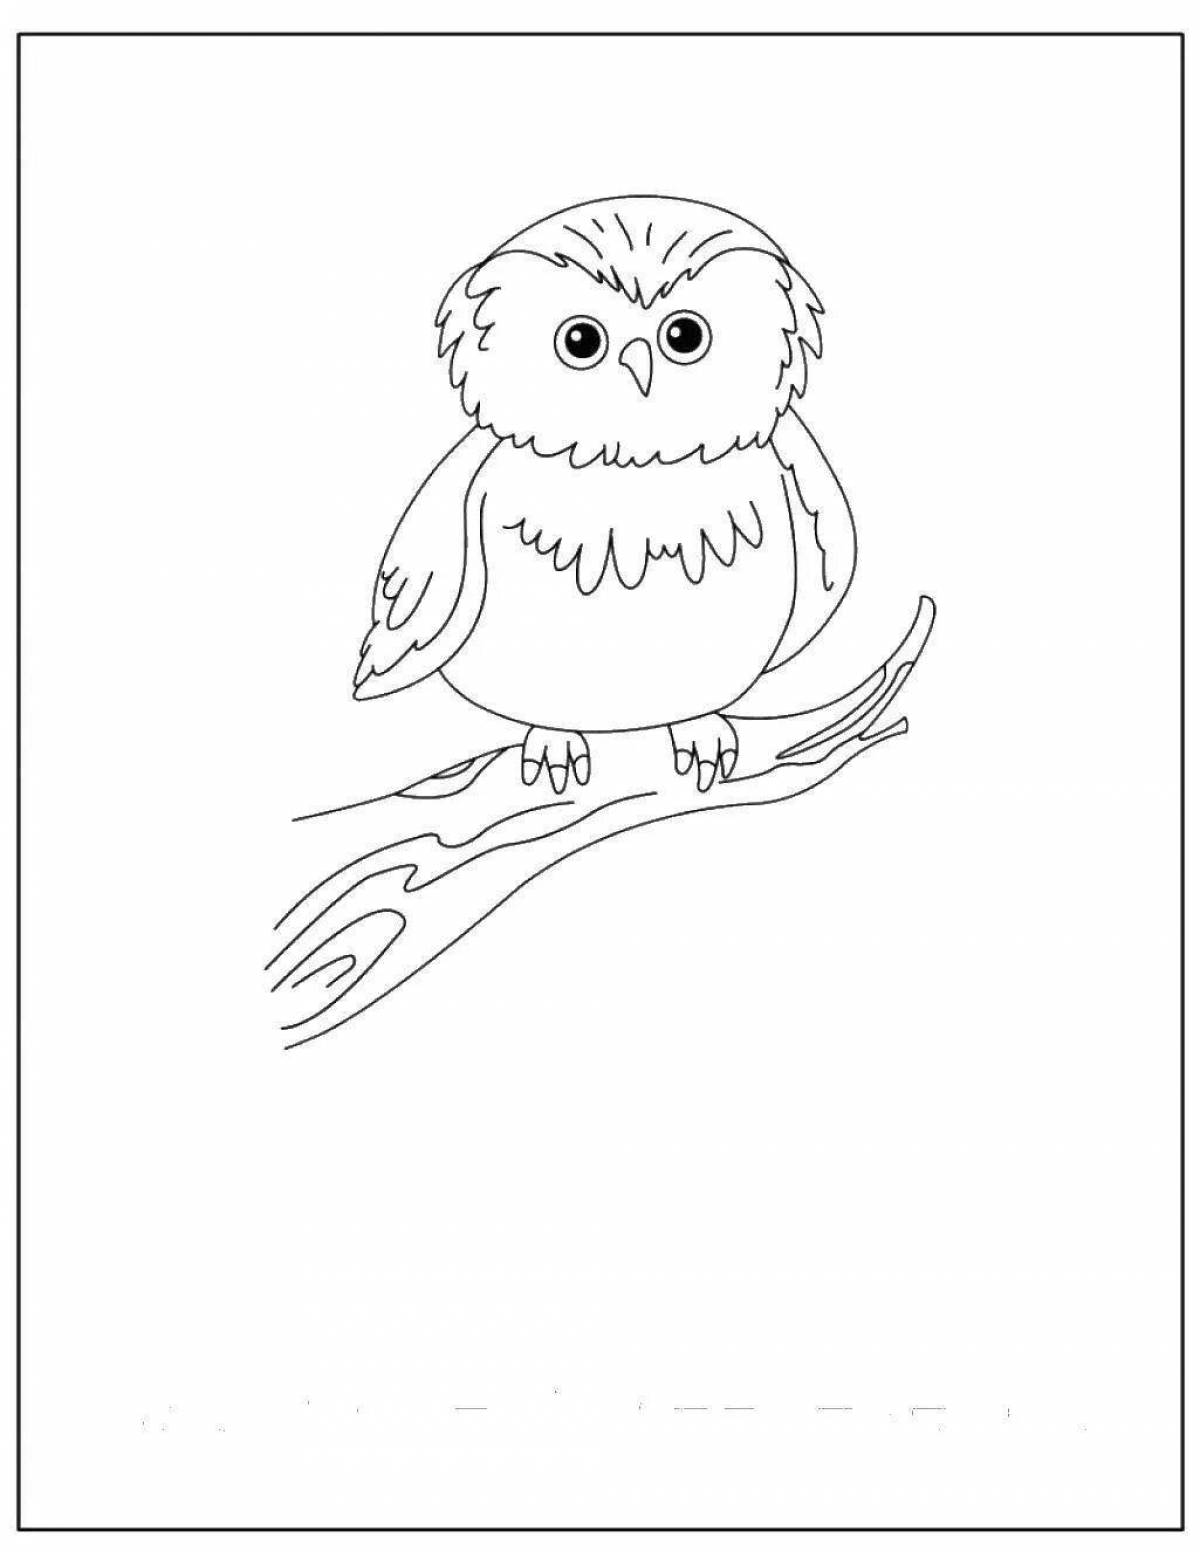 Fabulous snowy owl coloring pages for kids